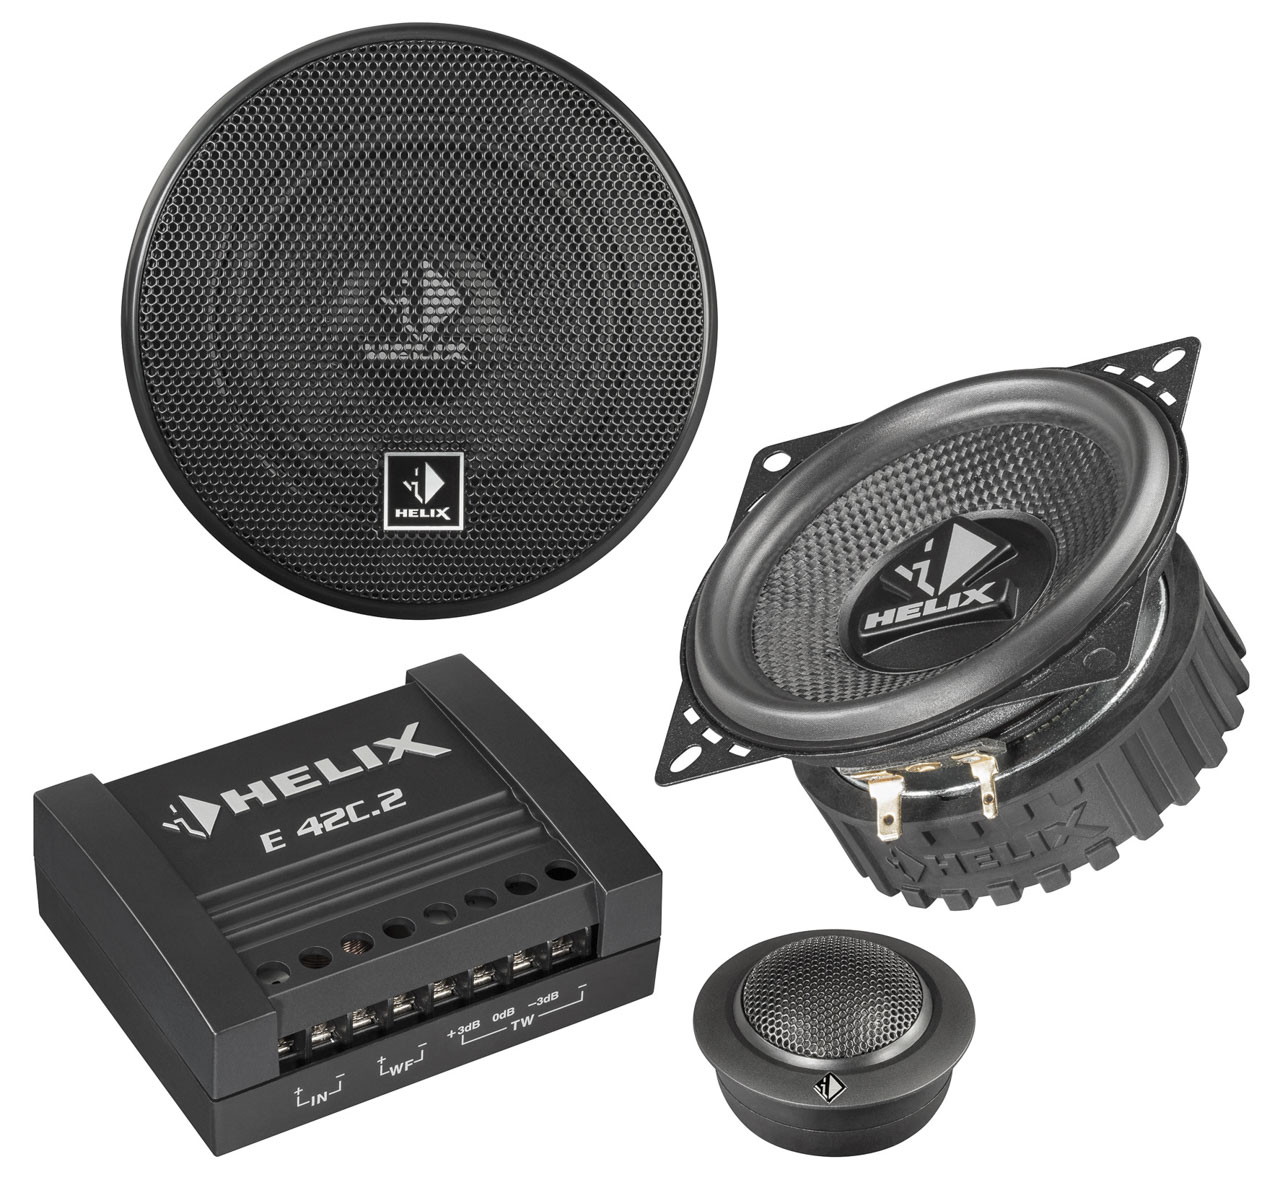 HELIX S 42C.2, 2-way component system, 4 inch / 100 mm